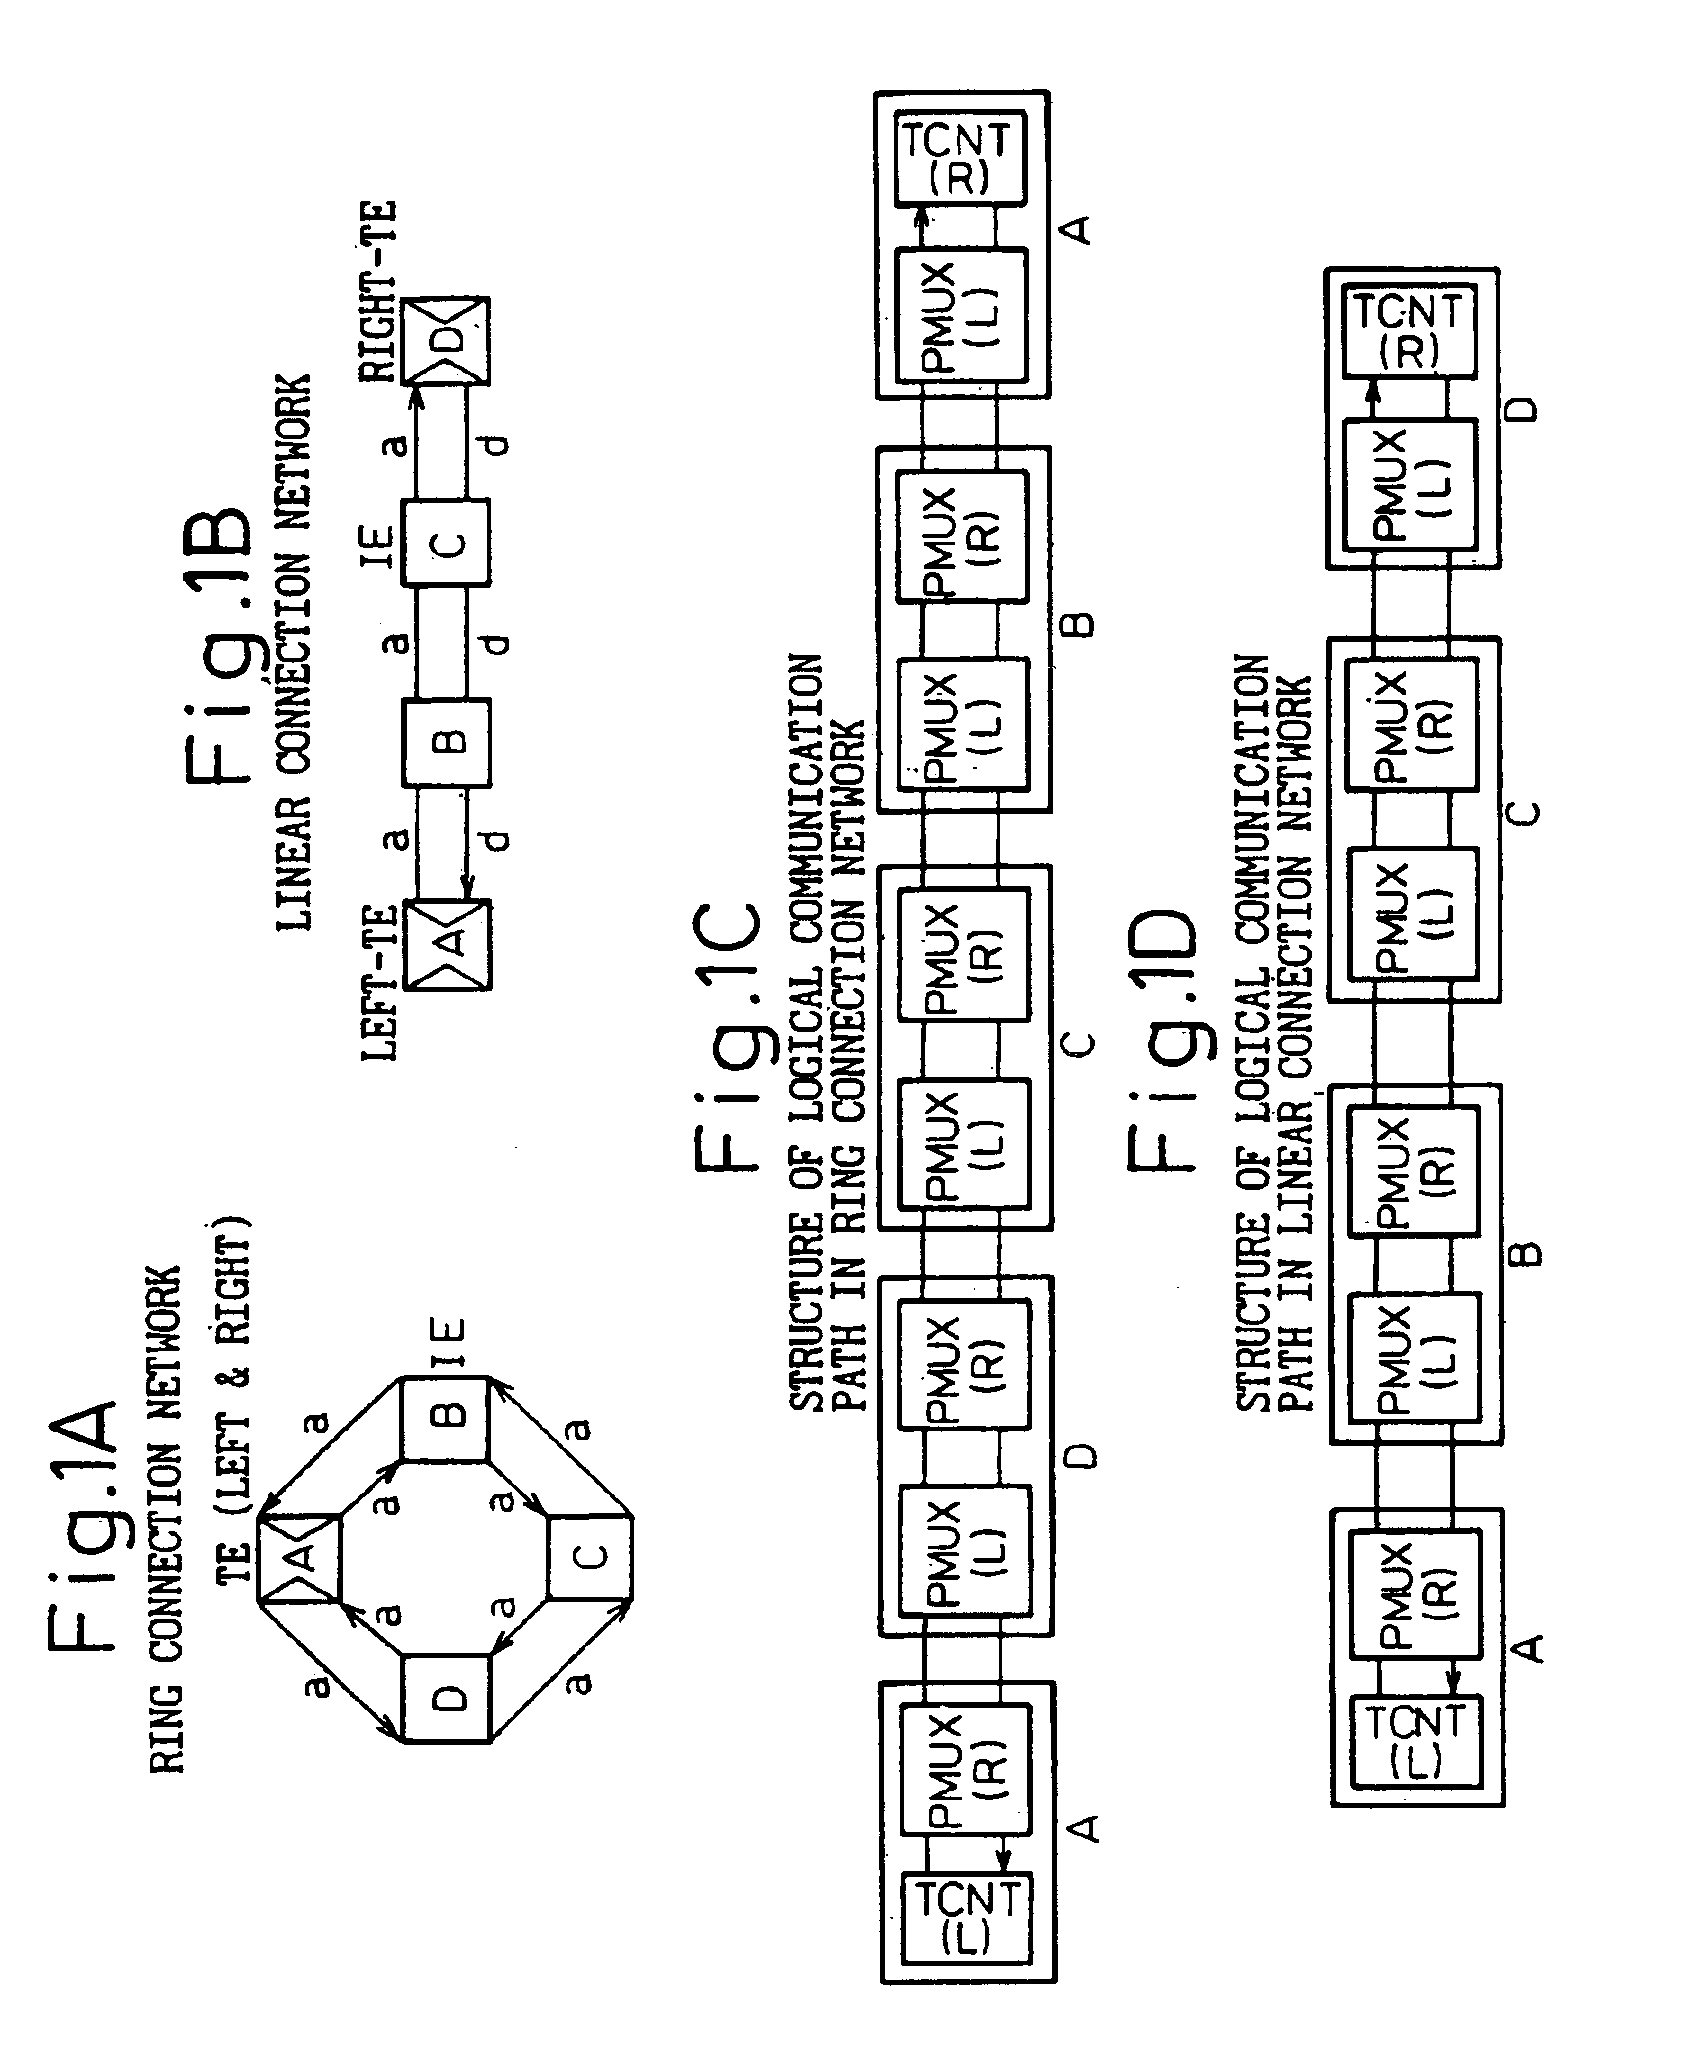 Method and apparatus for transmitting data in a linear-type or ring-type network